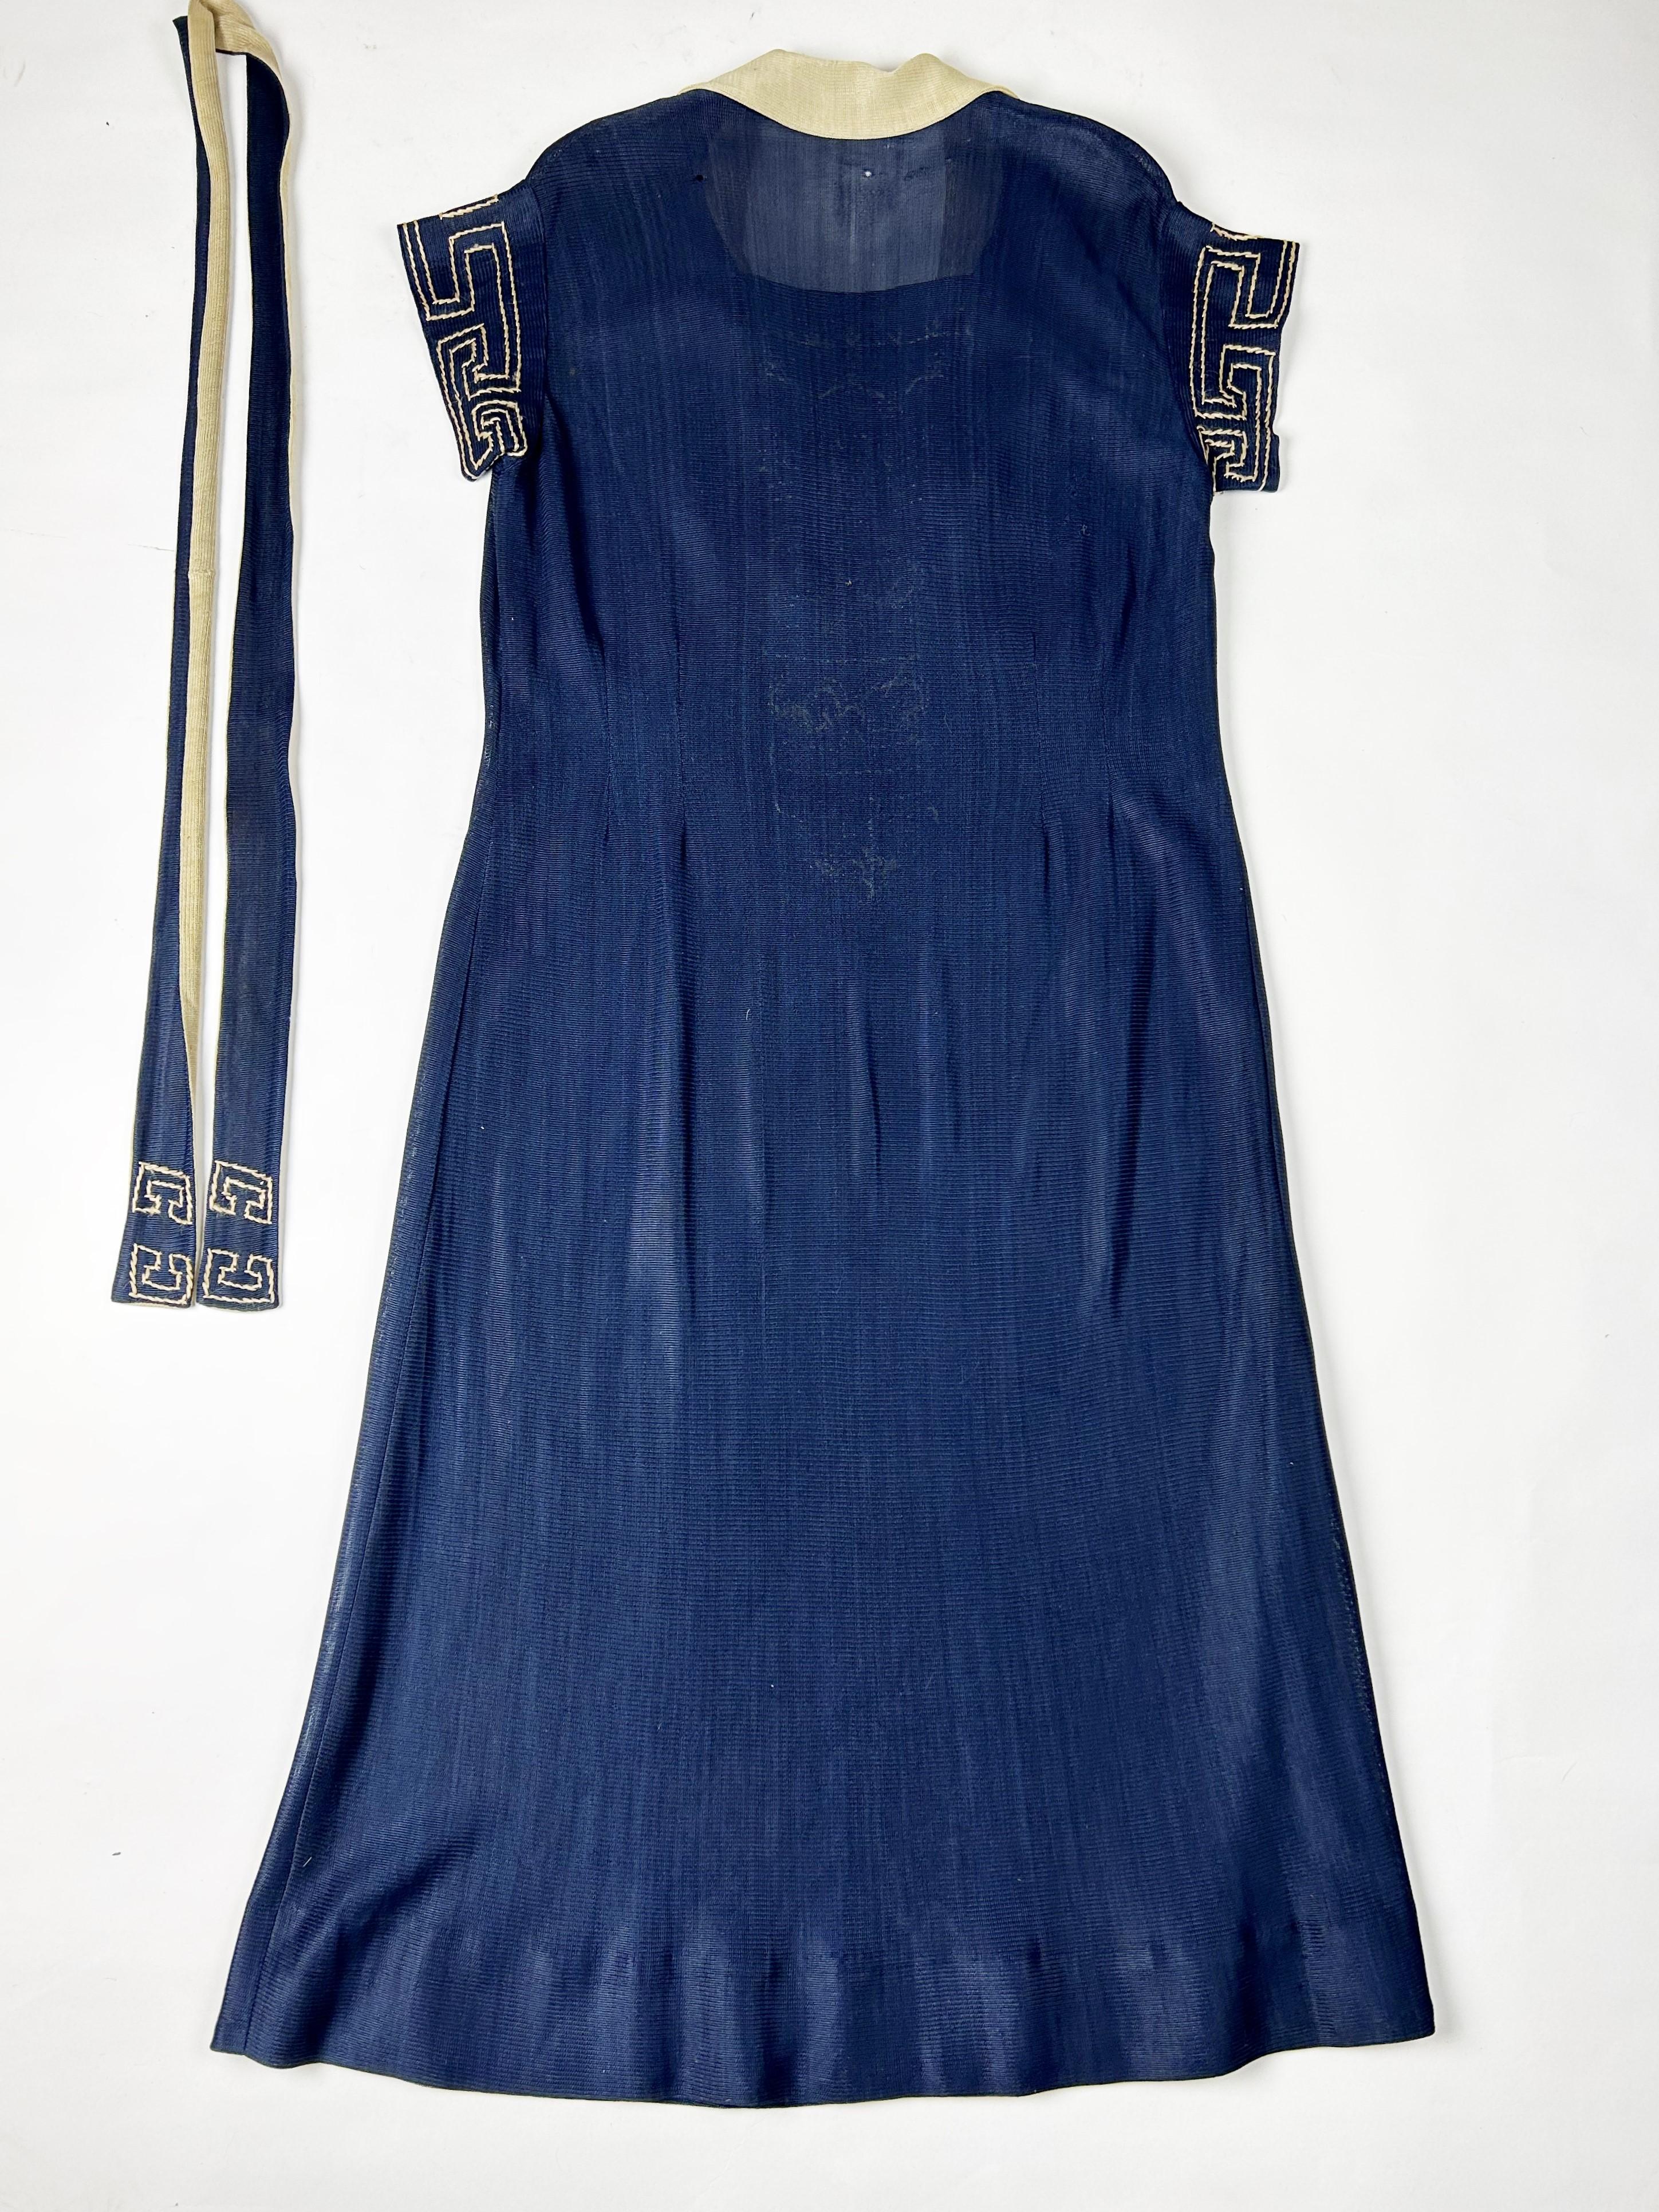 CC embroidered jersey knit silk Dress in the style of Coco Chanel France C. 1920 For Sale 2